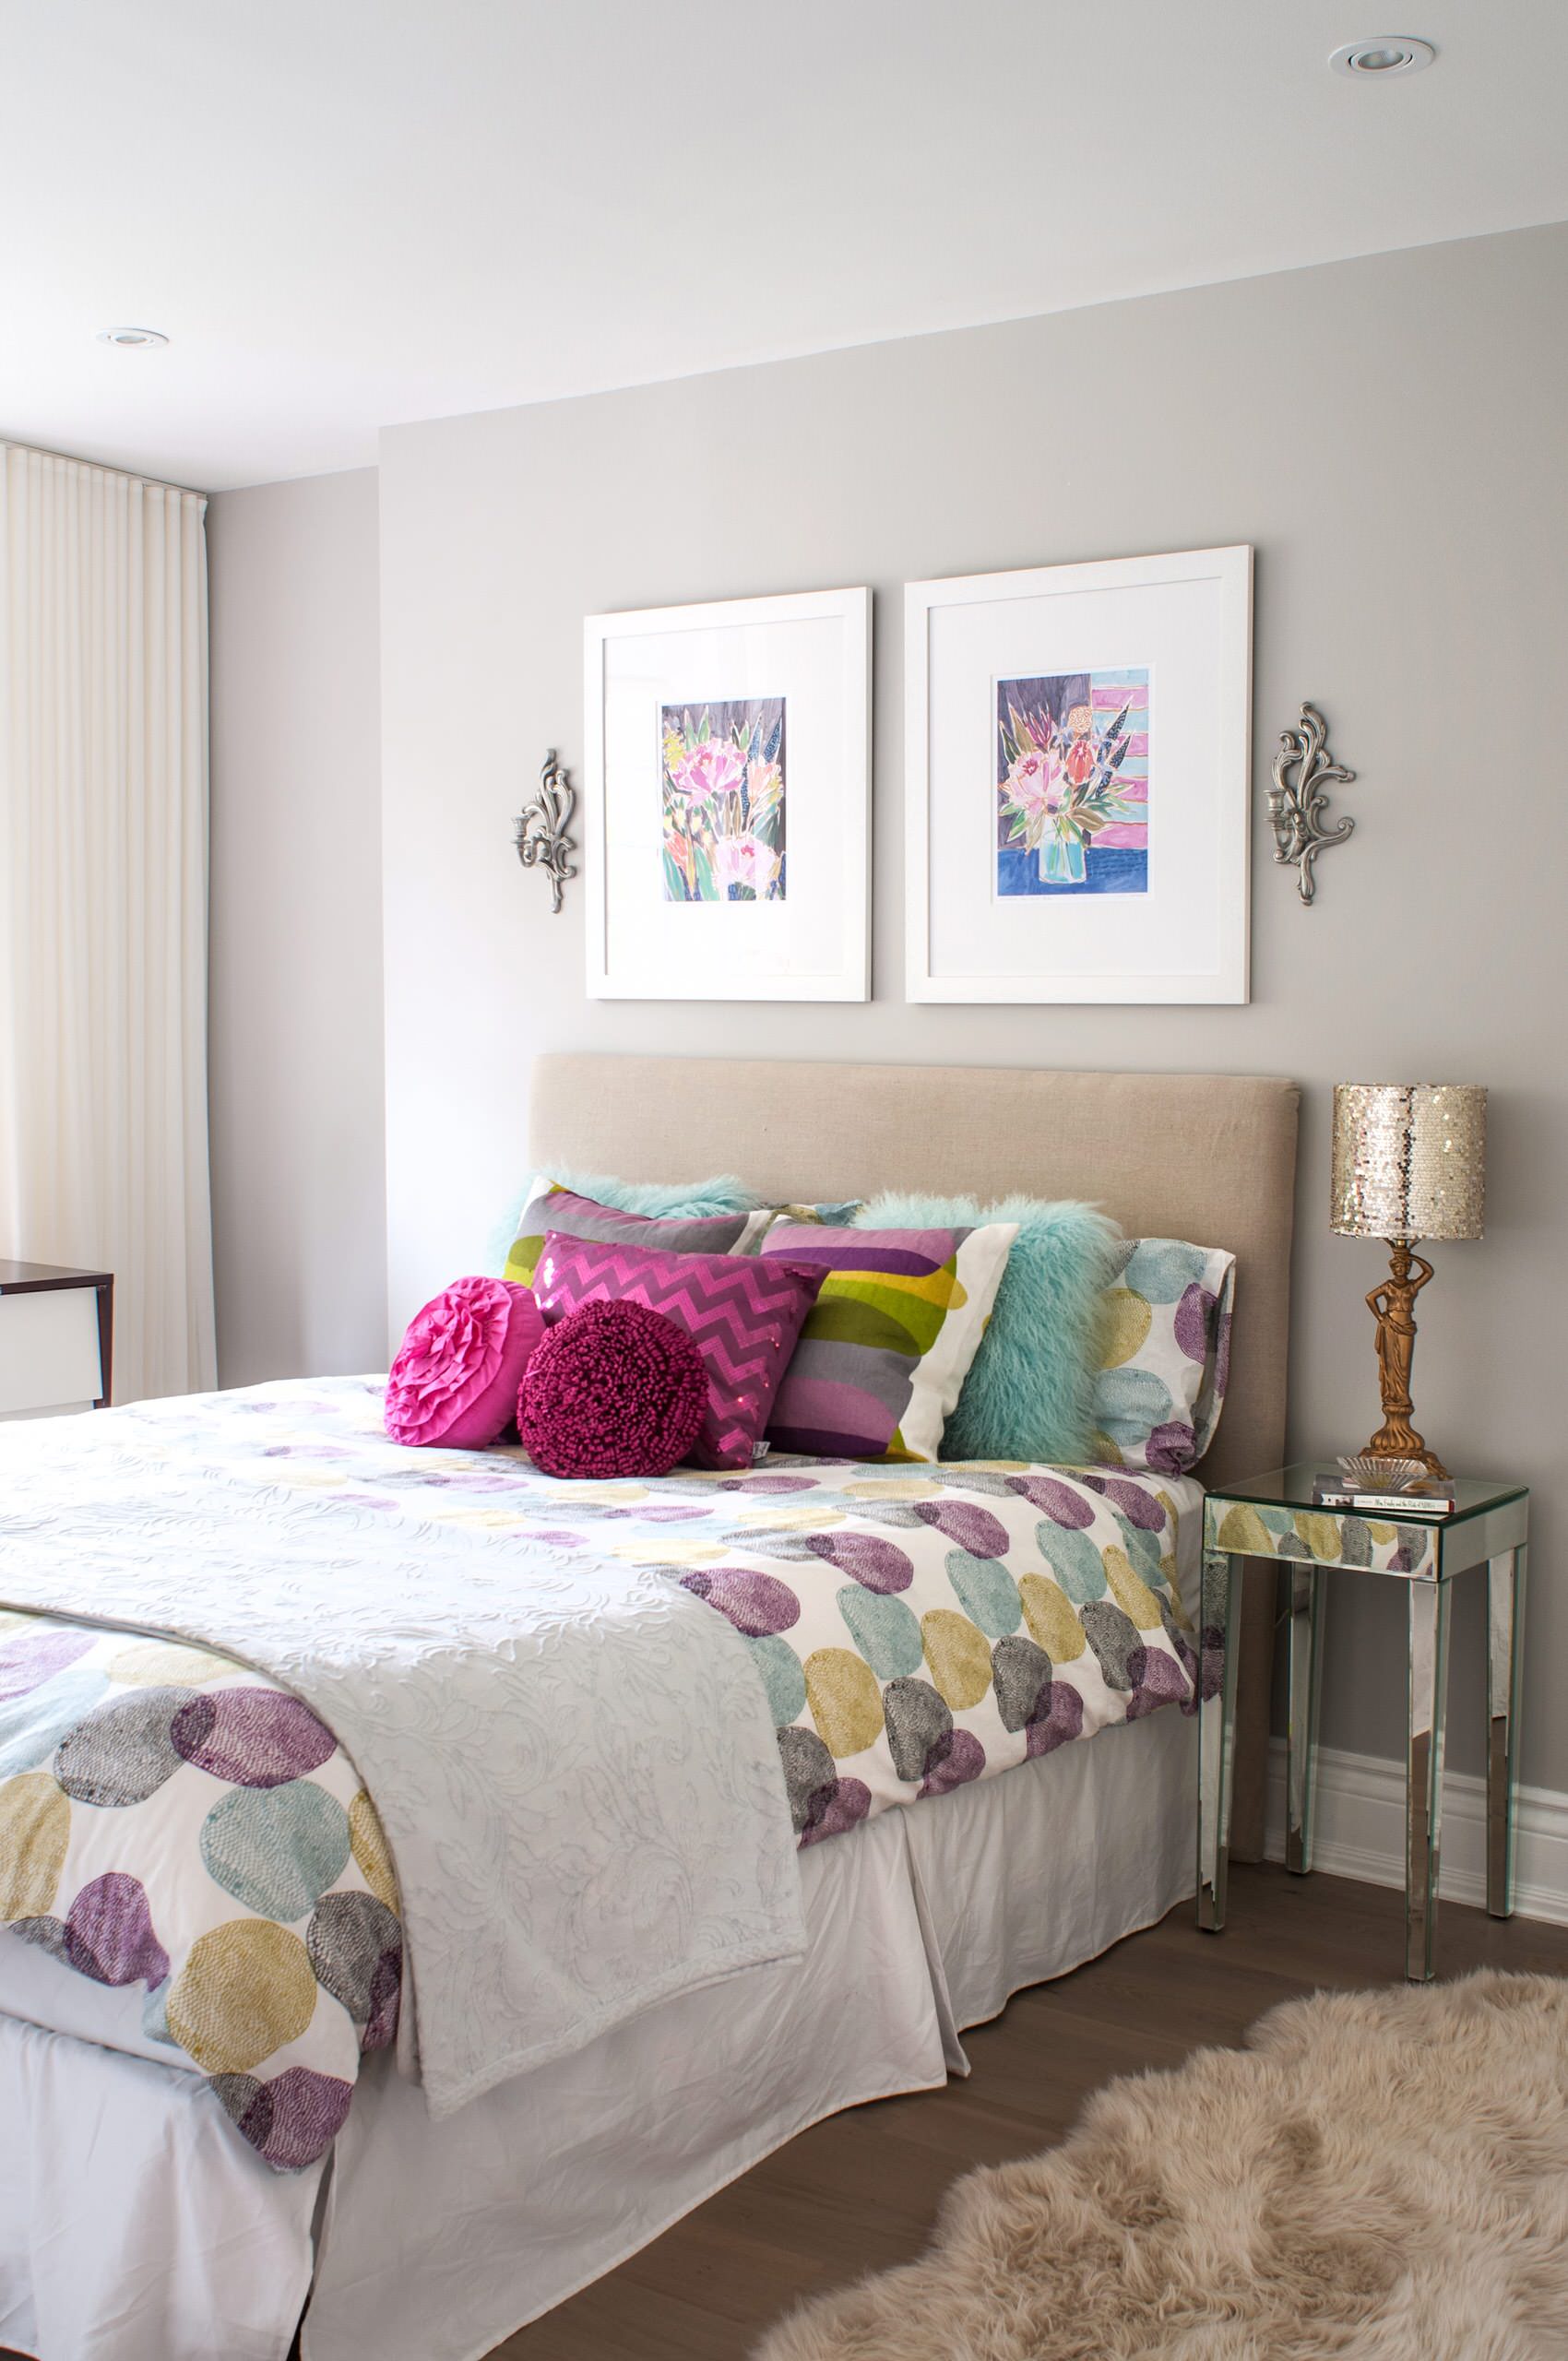 Mixing Bedroom Furniture Colors - Photos & Ideas | Houzz